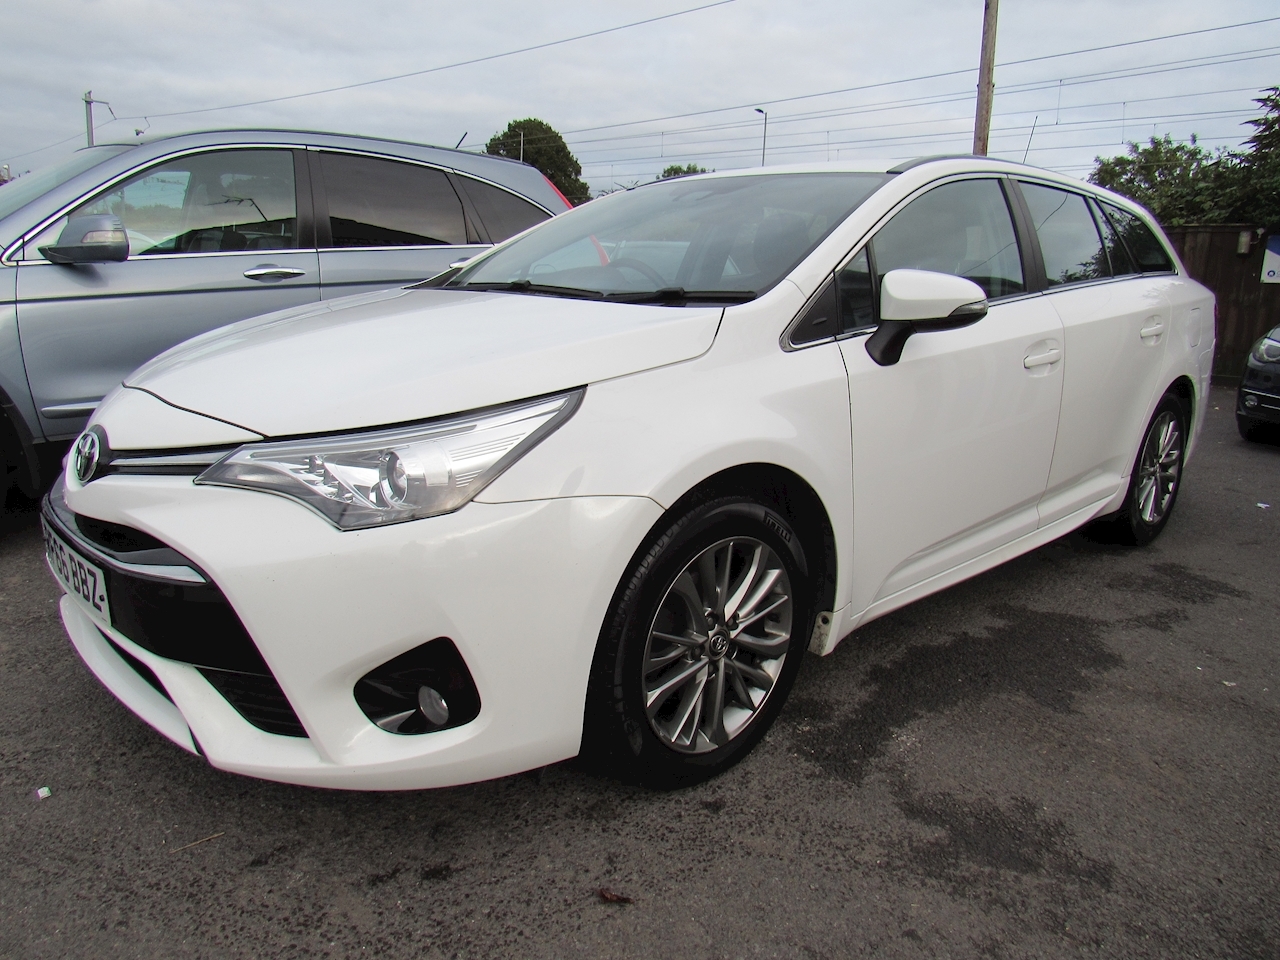 Avensis Business Edition Touring Sports 1.6 Manual Diesel